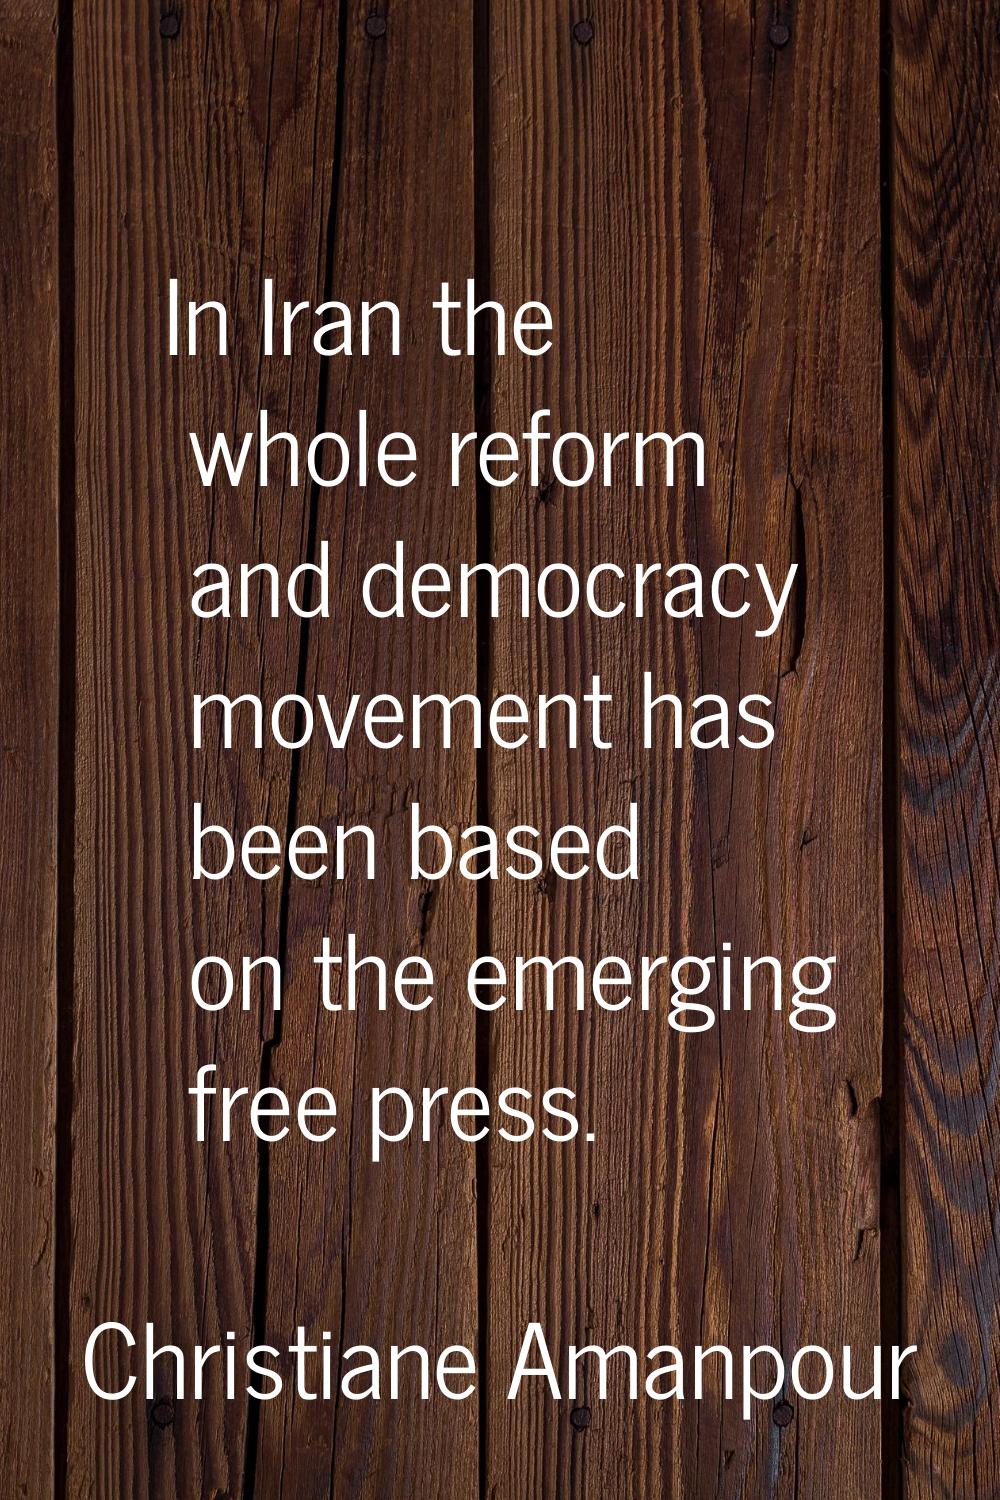 In Iran the whole reform and democracy movement has been based on the emerging free press.